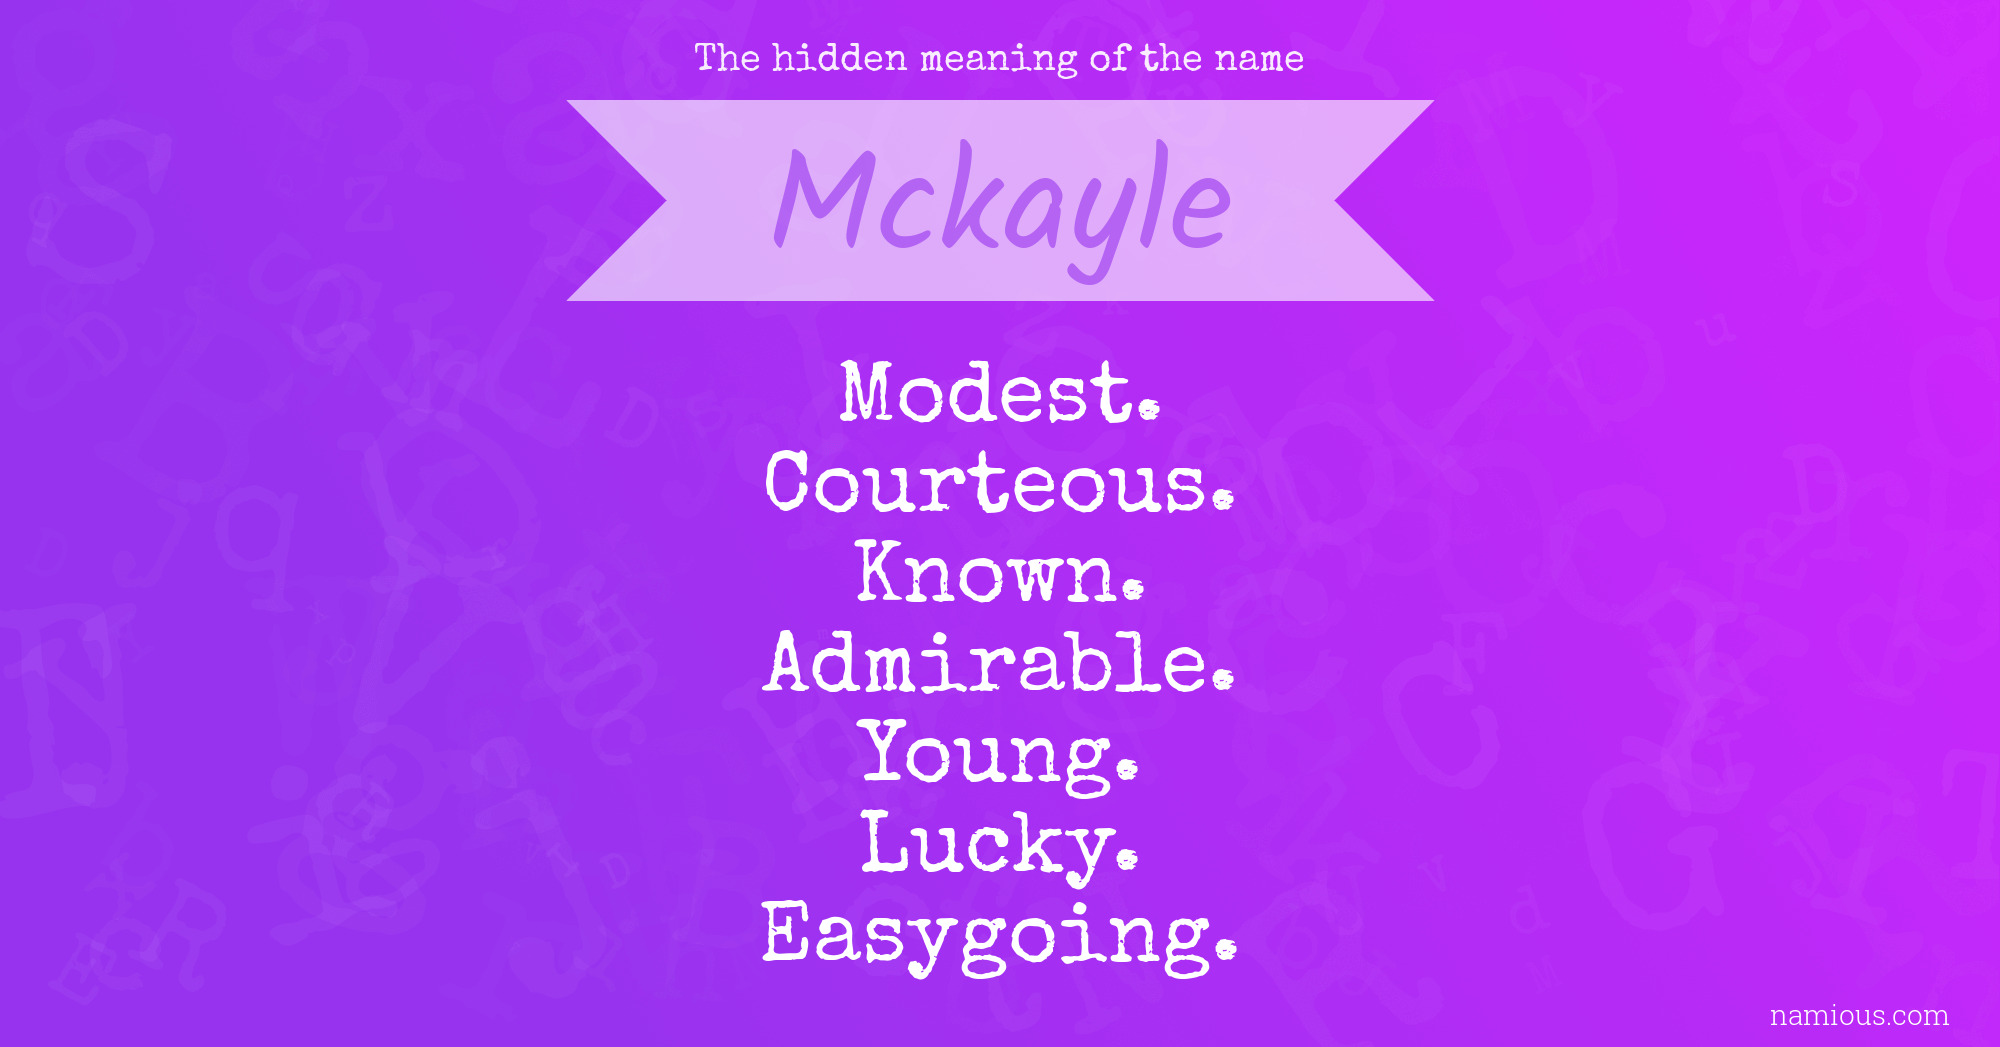 The hidden meaning of the name Mckayle